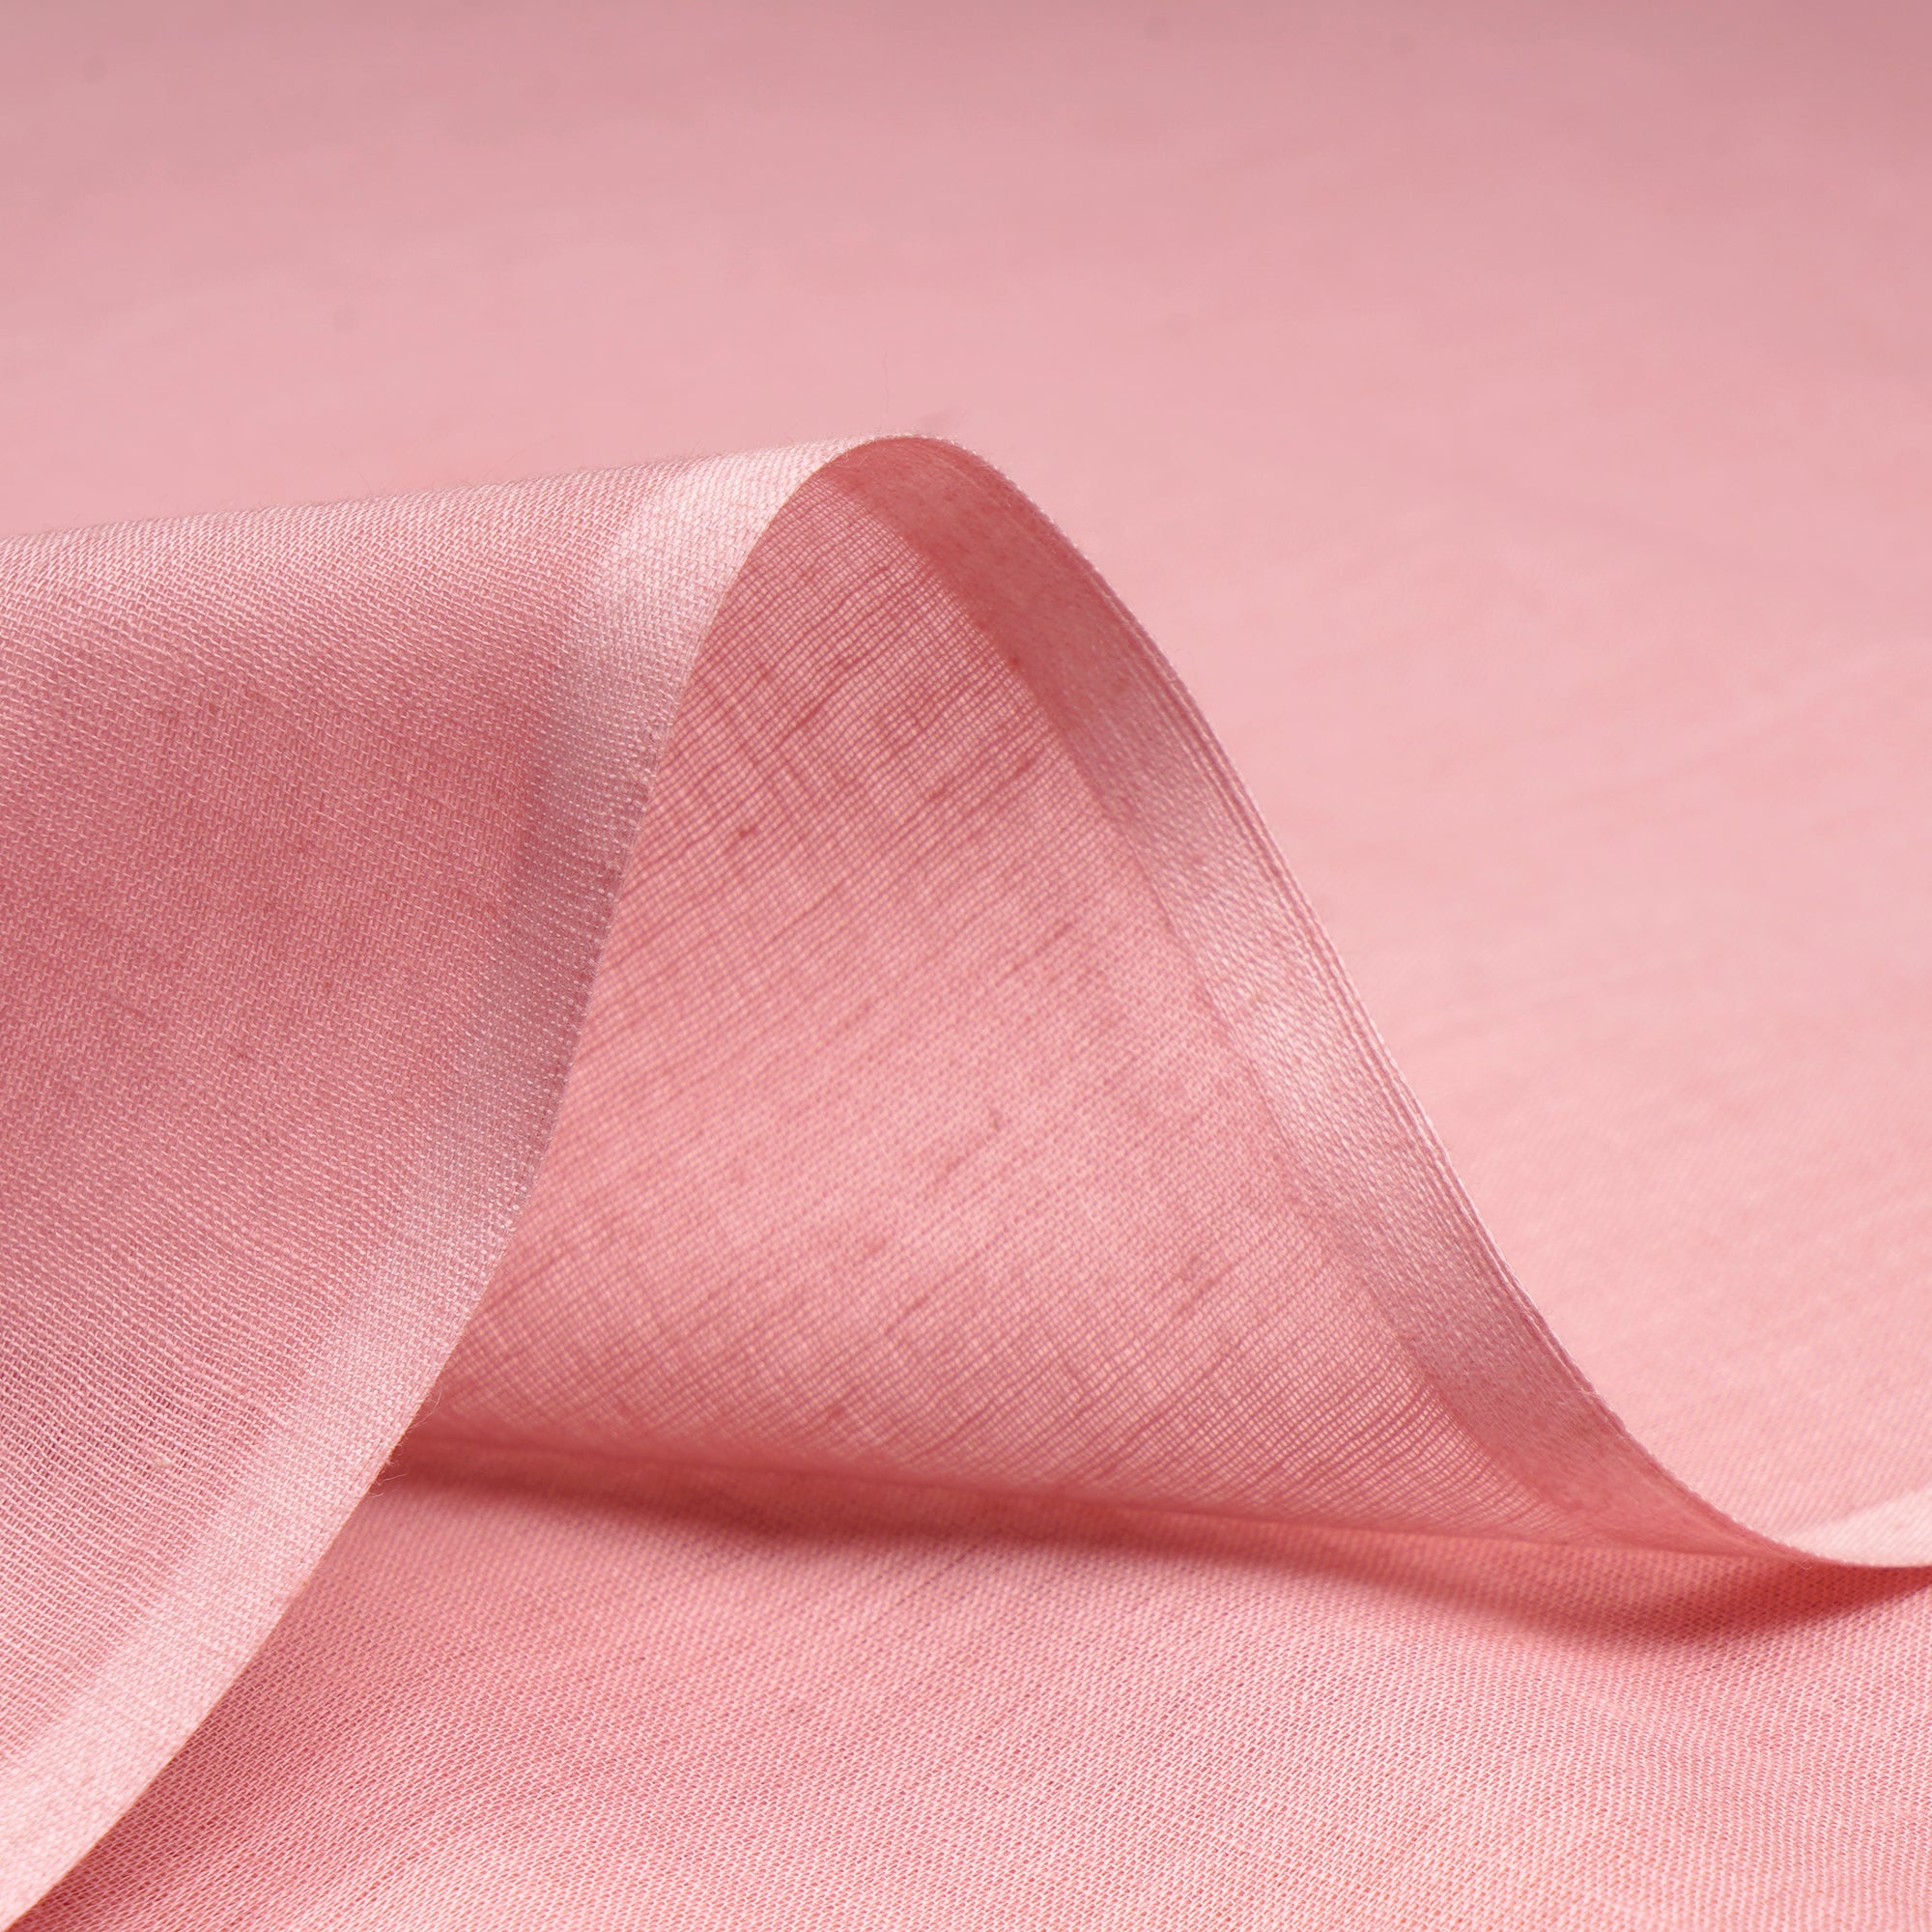 Blush Pink Piece Dyed Fine Cotton Voile Fabric